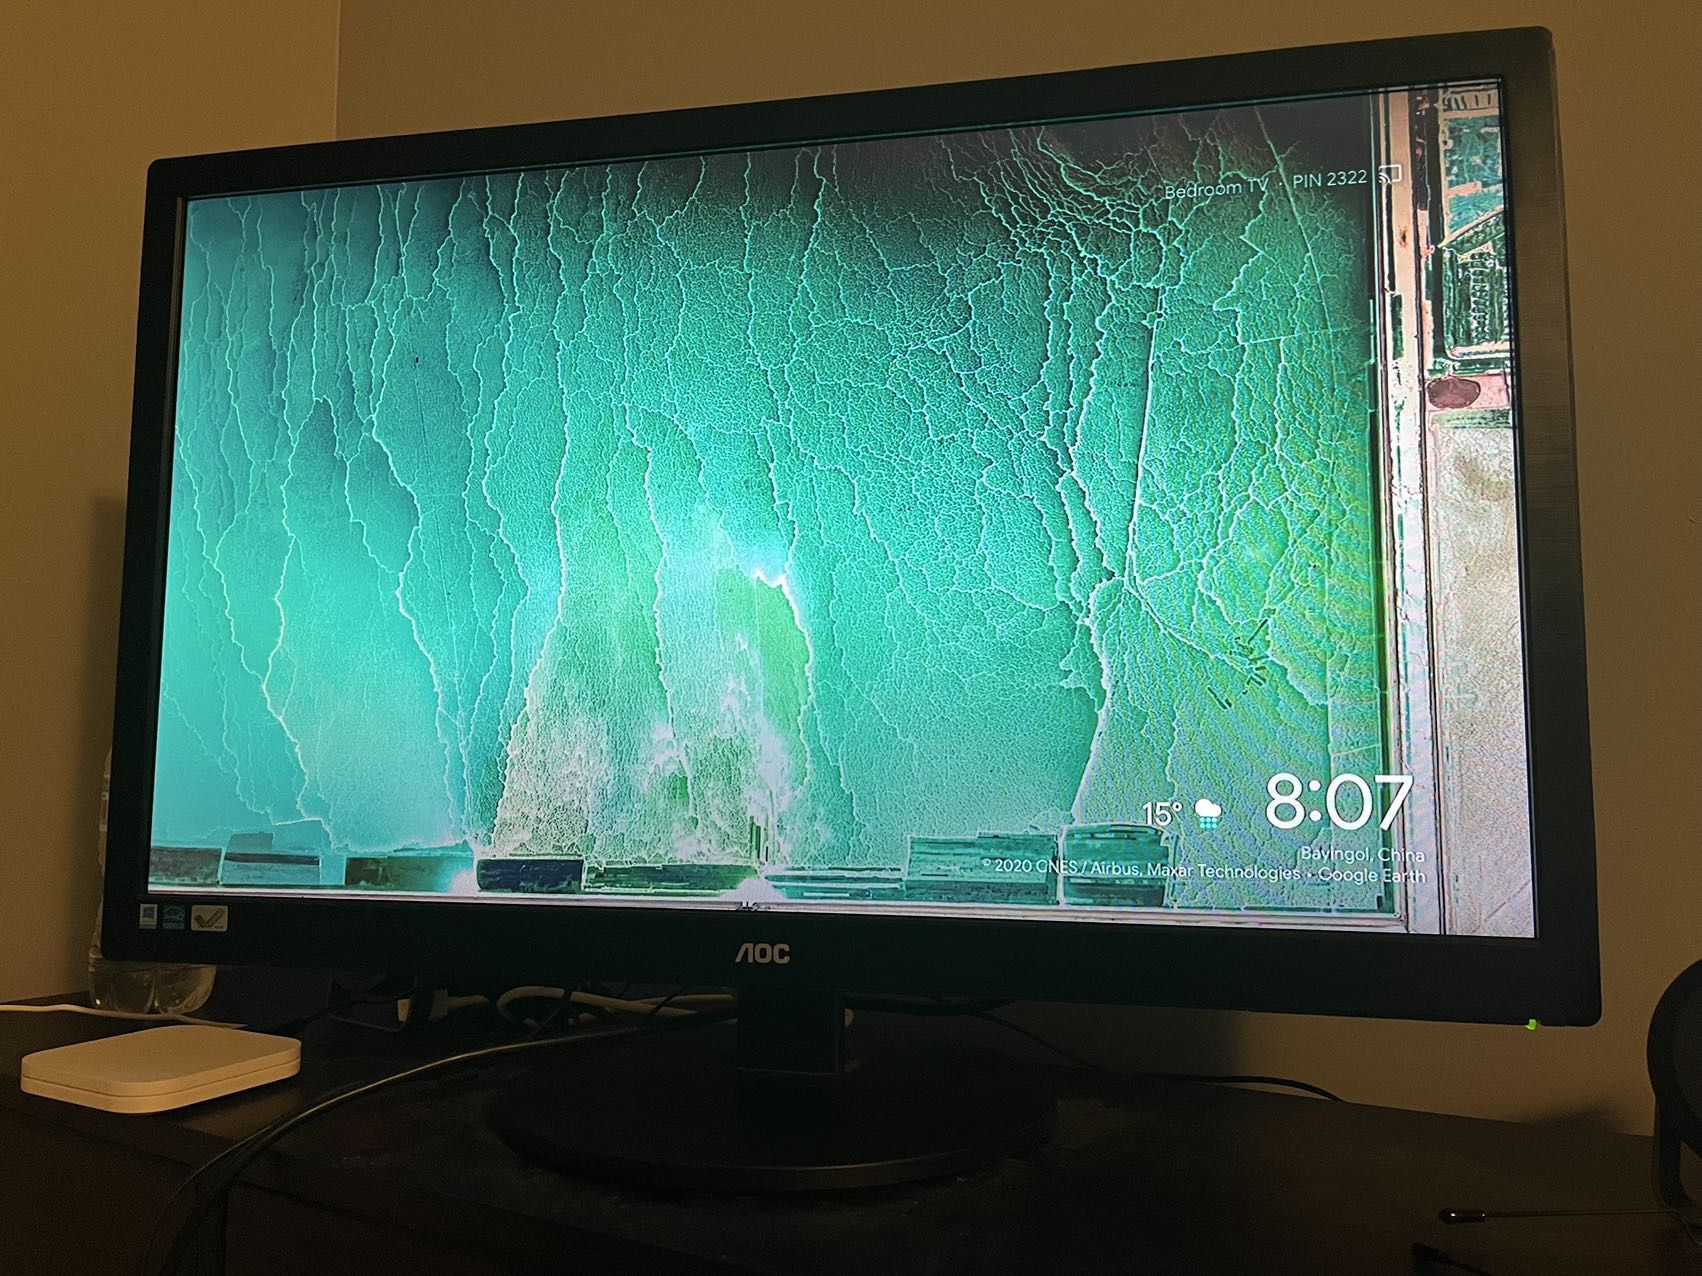 28 inches AOC computer monitor full HD 1080P in excellent condition. Come with original box.